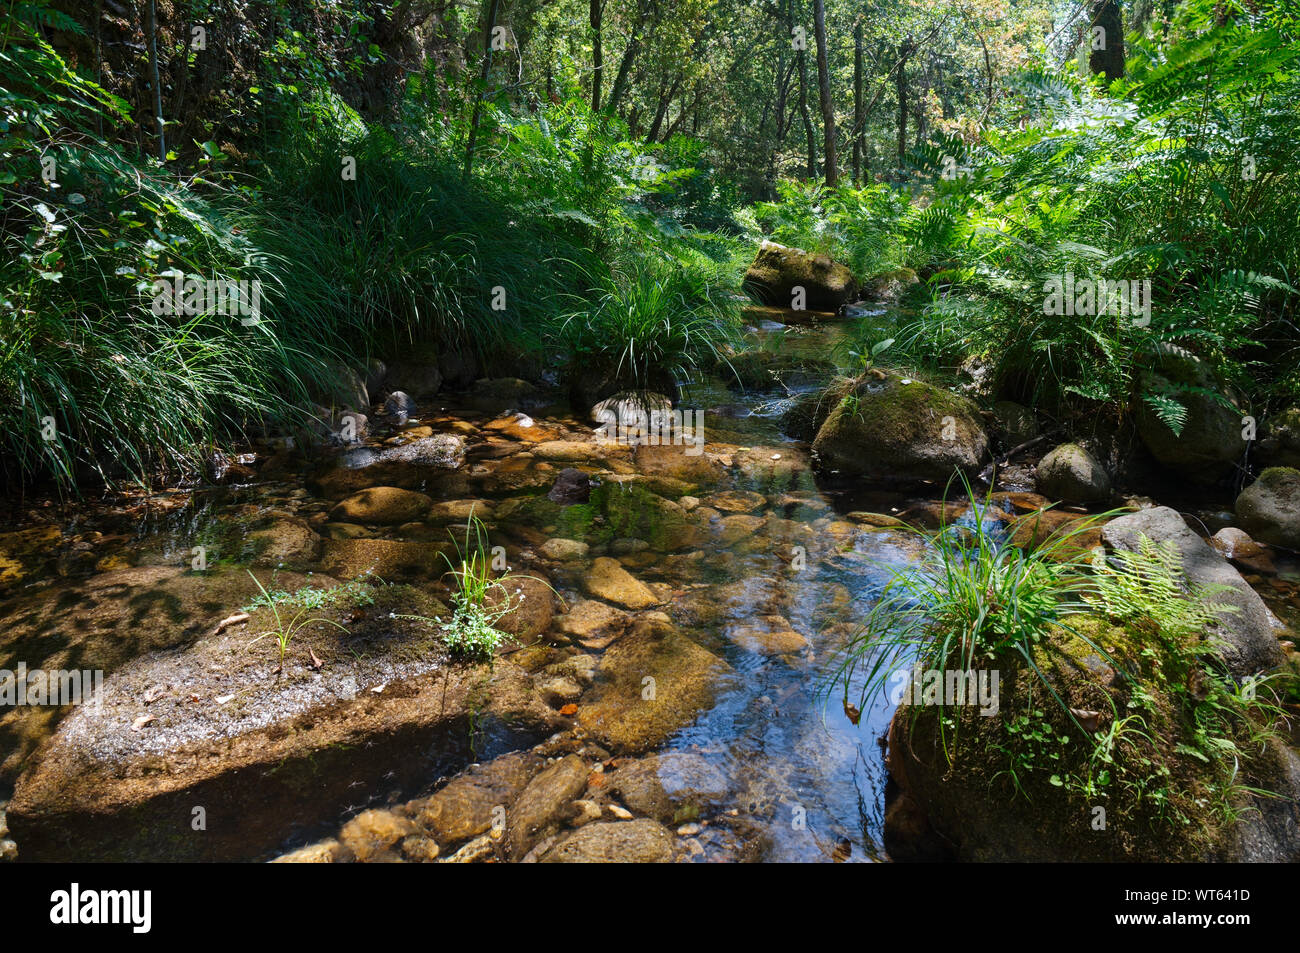 Peaceful river waters in the forests of Carvalhais. Sao Pedro do Sul, Portugal Stock Photo